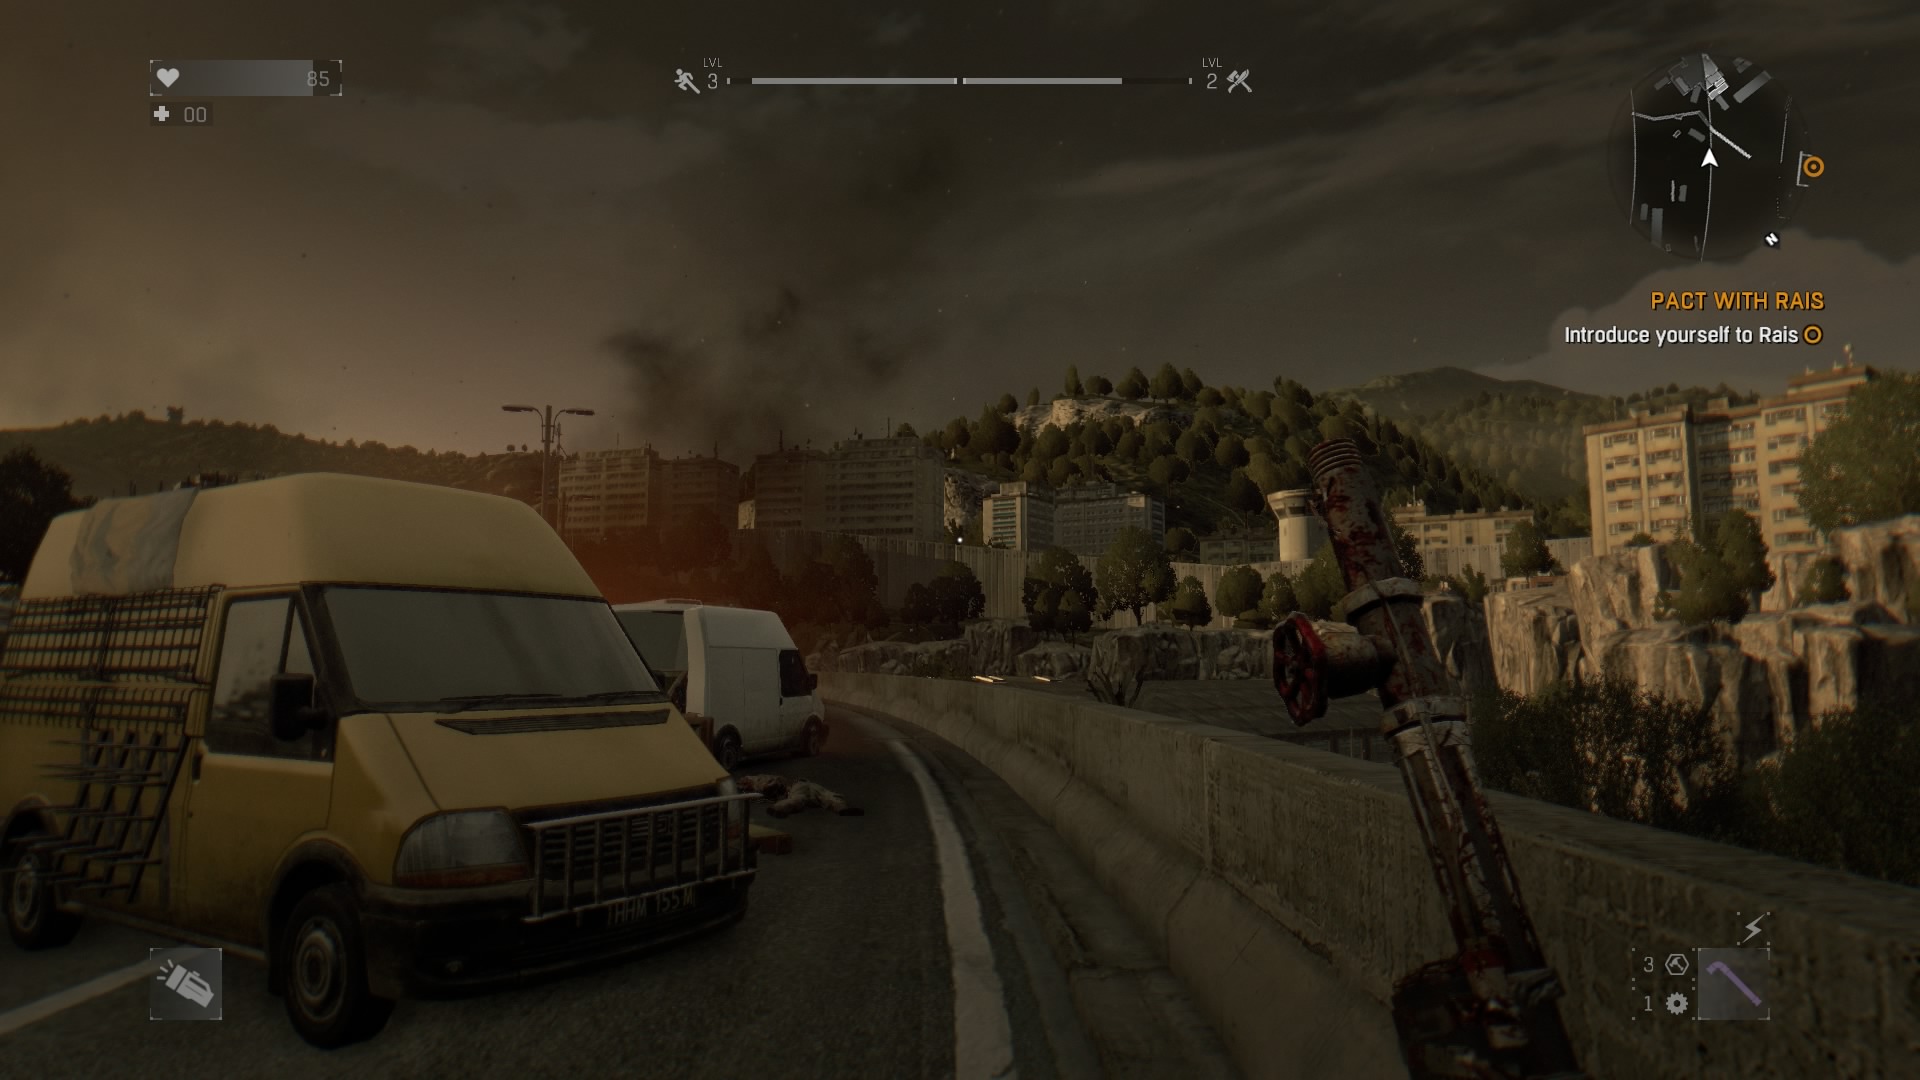 How To Make Dying Light More Difficult